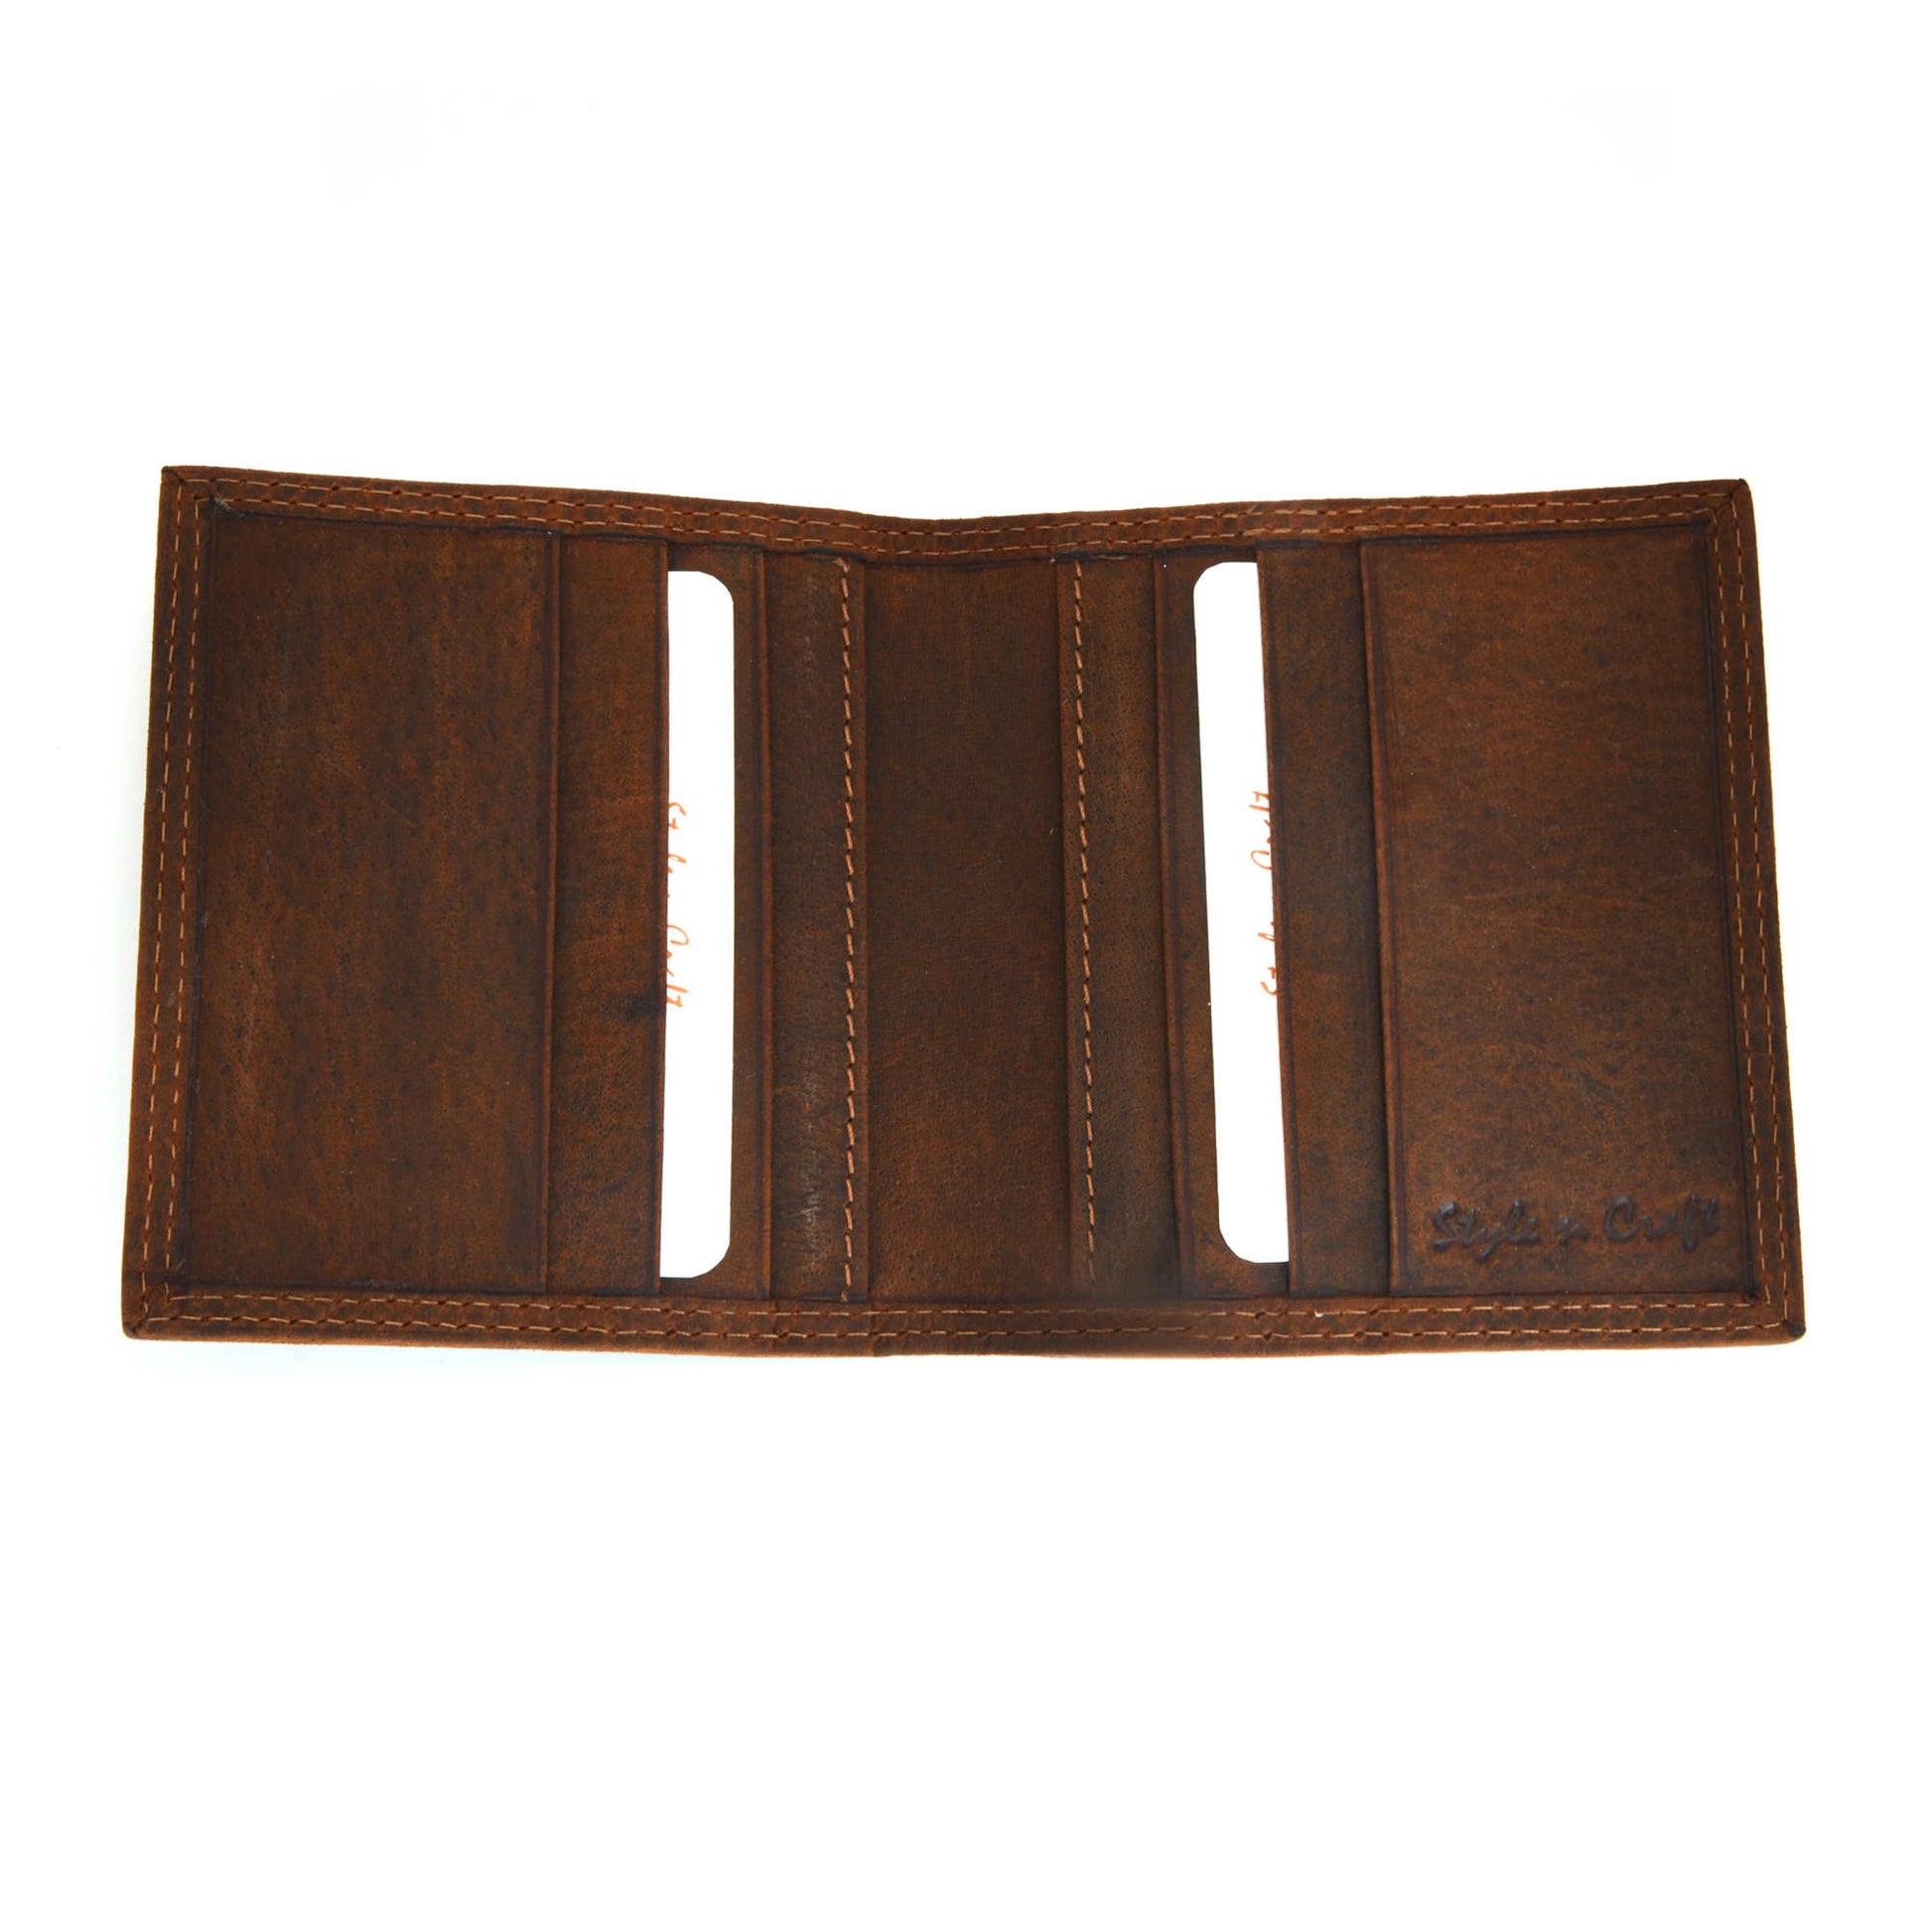 Style n Craft 300703-BR Credit Card / Business Card Case in Brown Leather with Vintage like 2 Tone Effect & Double Stitching on the outside. It has RFID Protection. Open View Showing the Interior Pockets - Picture of the Wallet in a Lighter Shade